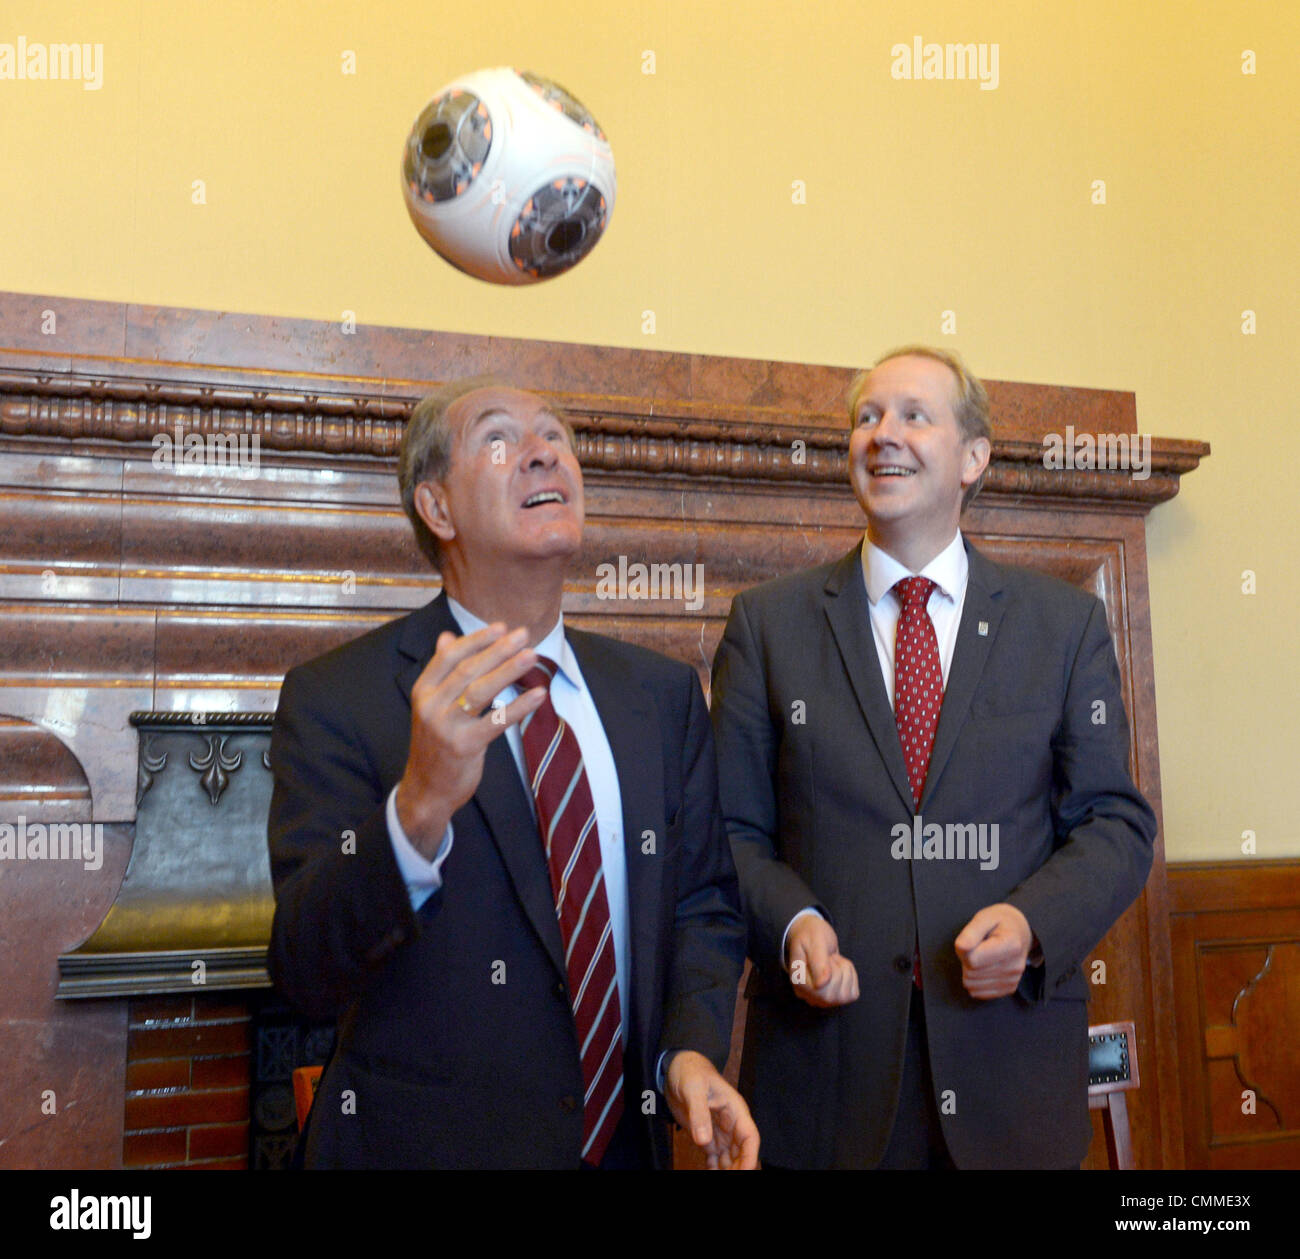 Hanover, Germany. 06th Nov, 2013. The mayor of Brunswick, Gert Hoffmann (CDU, L) and the mayor of Hanover, Stefan Schostok (SPD), play with a ball during a press conference for the Bundesliga match Hannover 96 vs Eintracht Braunschweig in the townhall in Hanover, Germany, 06 November 2013. The derby takes place on 08 November 2013. Photo: Peter Steffen/dpa/Alamy Live News Stock Photo